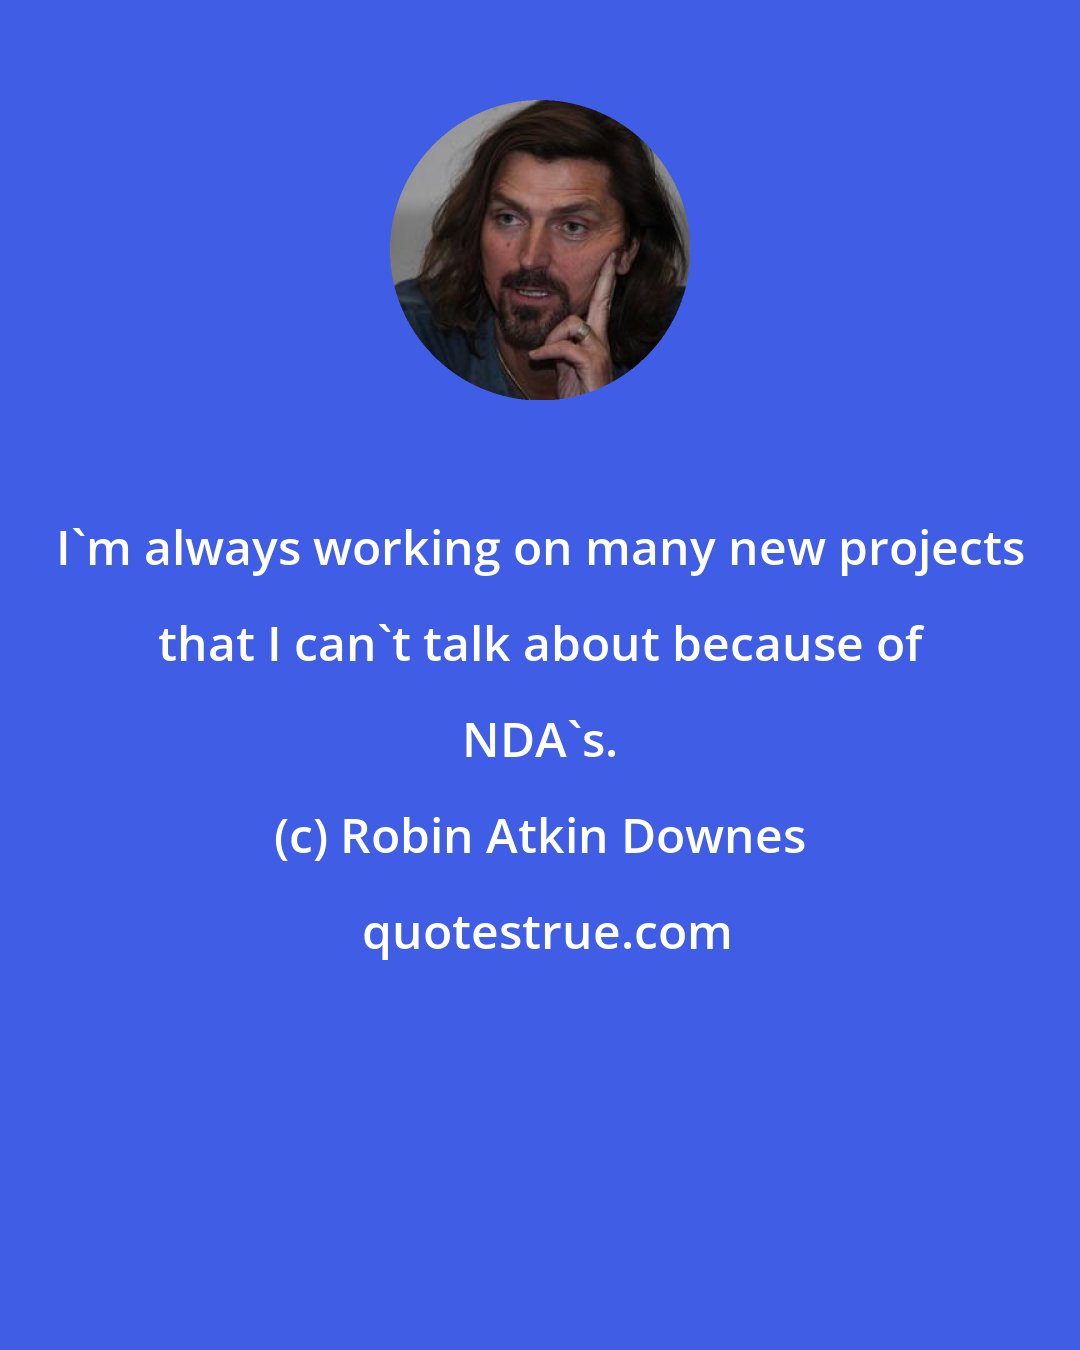 Robin Atkin Downes: I'm always working on many new projects that I can't talk about because of NDA's.